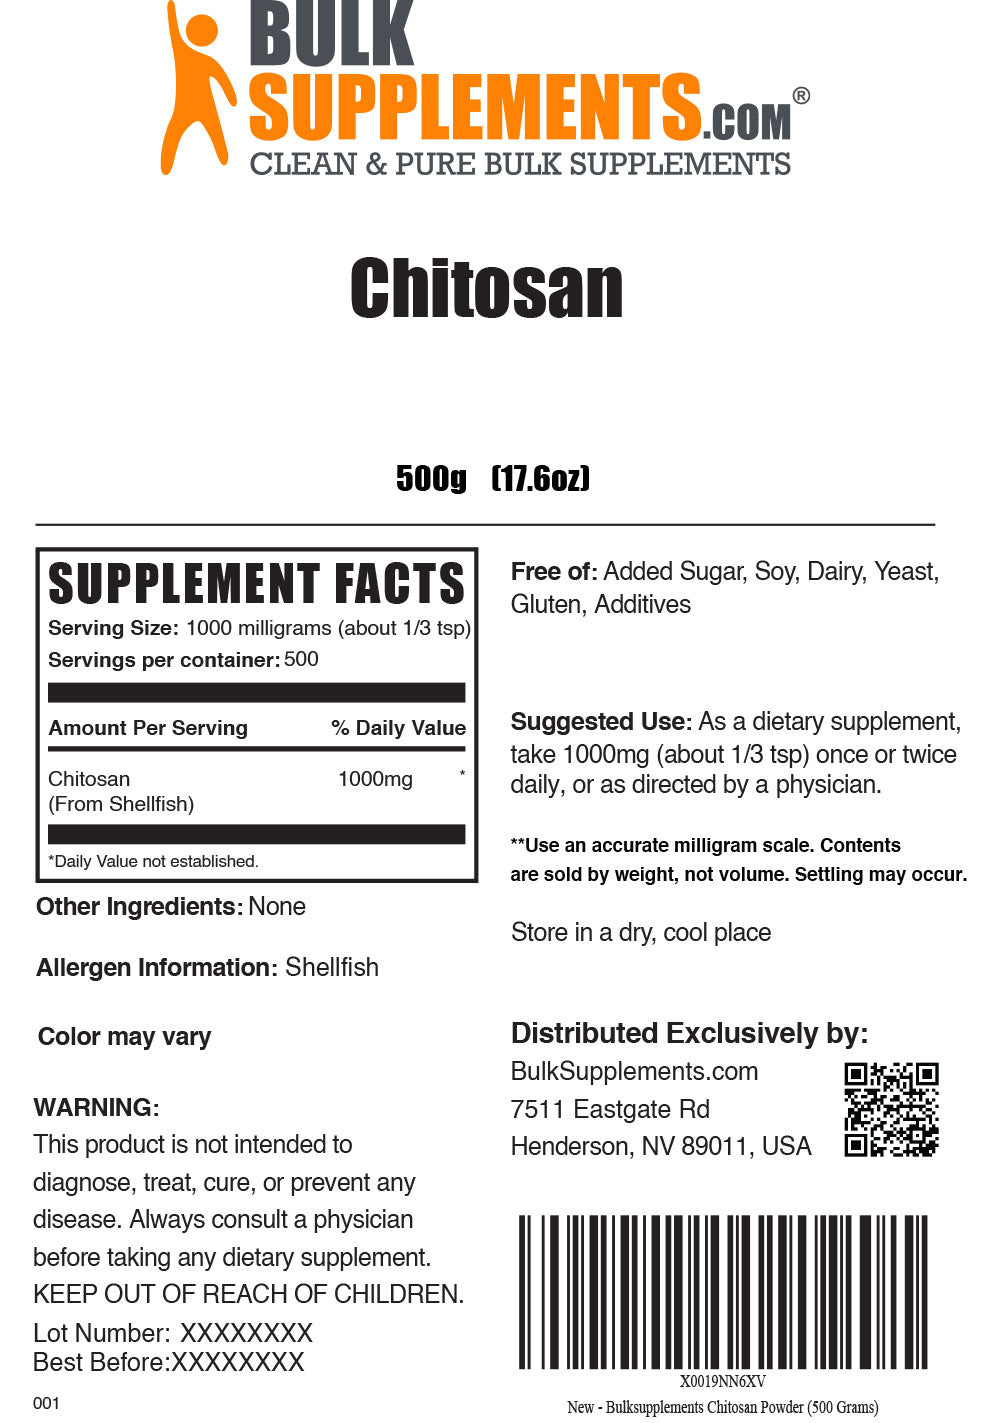 500g chitosan supplement facts label